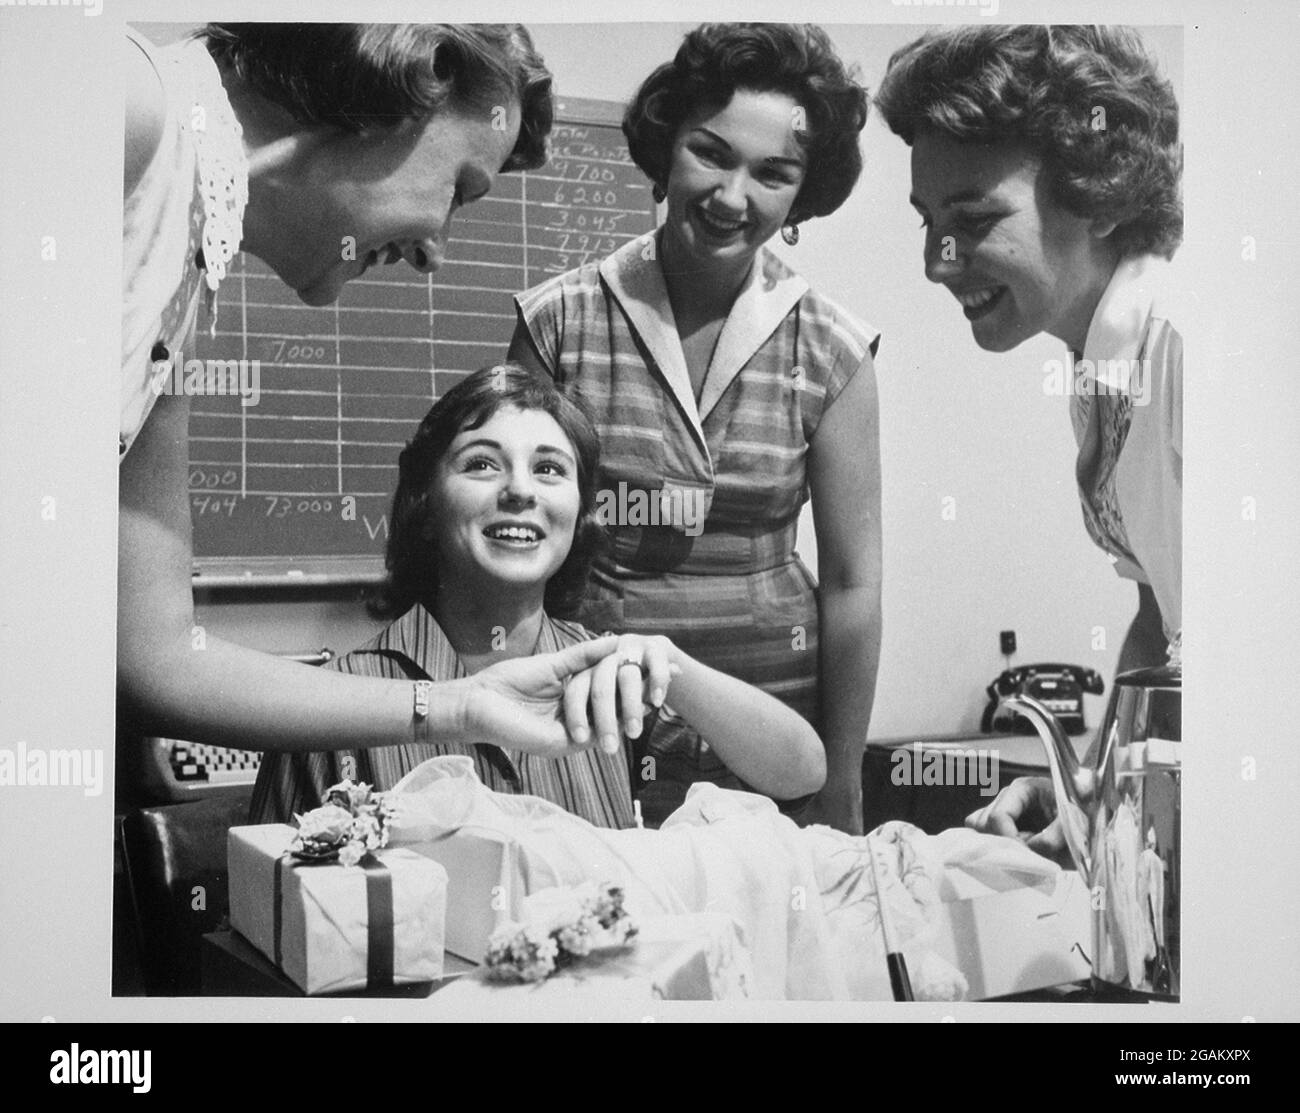 Female co-workers crowd around a beaming bride-to-be as she shows off her engagement ring and receives gifts and congratulations, no location, circa 1960. (Photo by United States Information Agency/RBM Vintage Images) Stock Photo